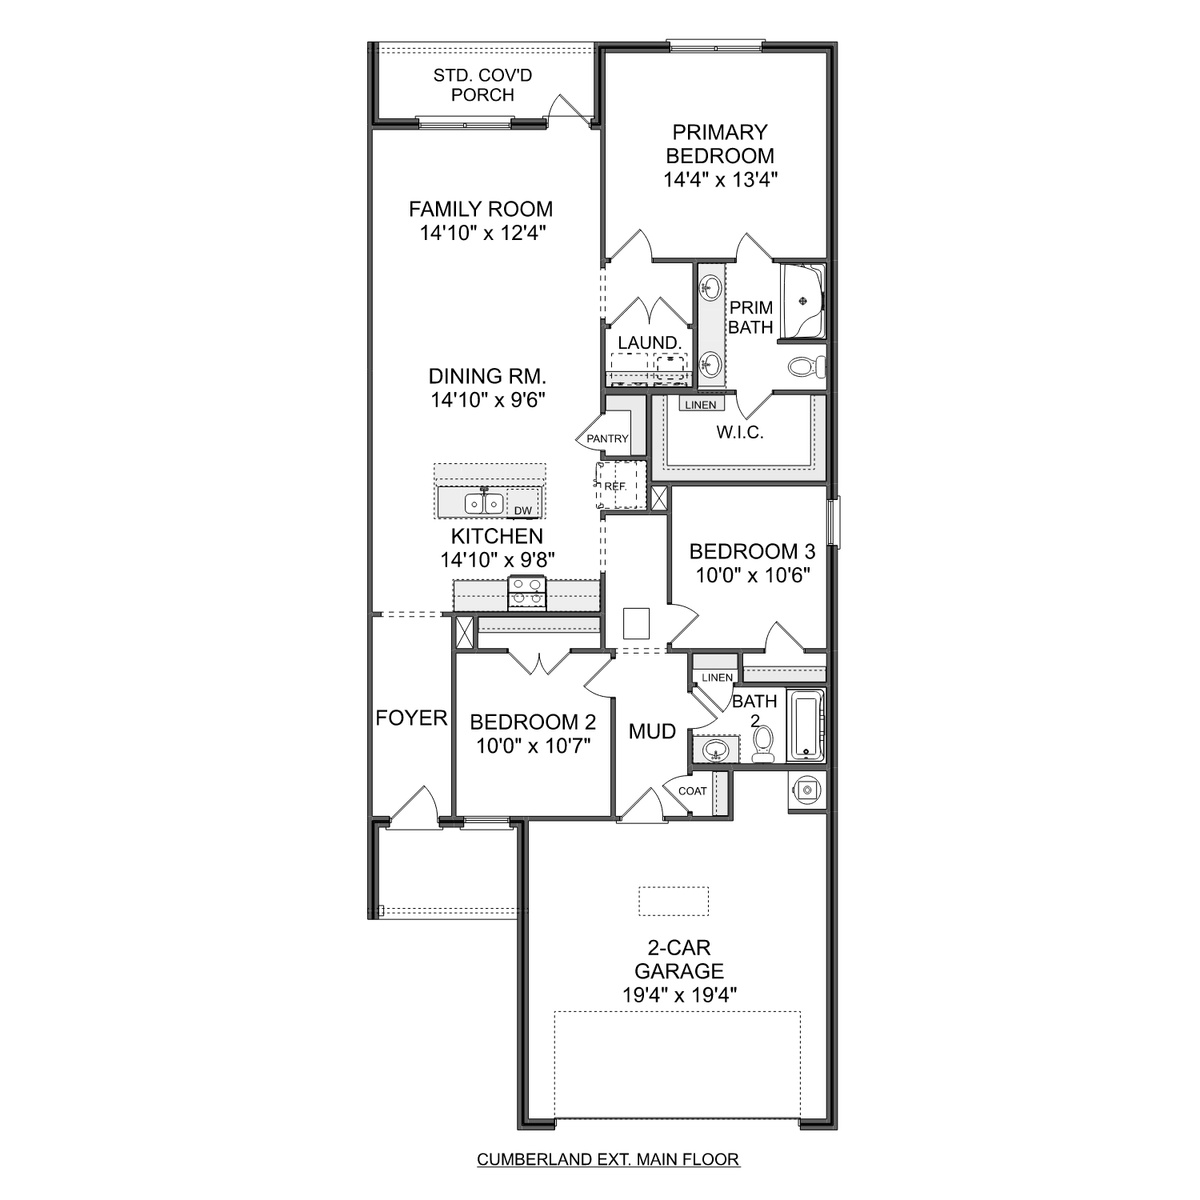 1 - The Cumberland C floor plan layout for 3147 Lea Lane in Davidson Homes' Hollon Meadow community.